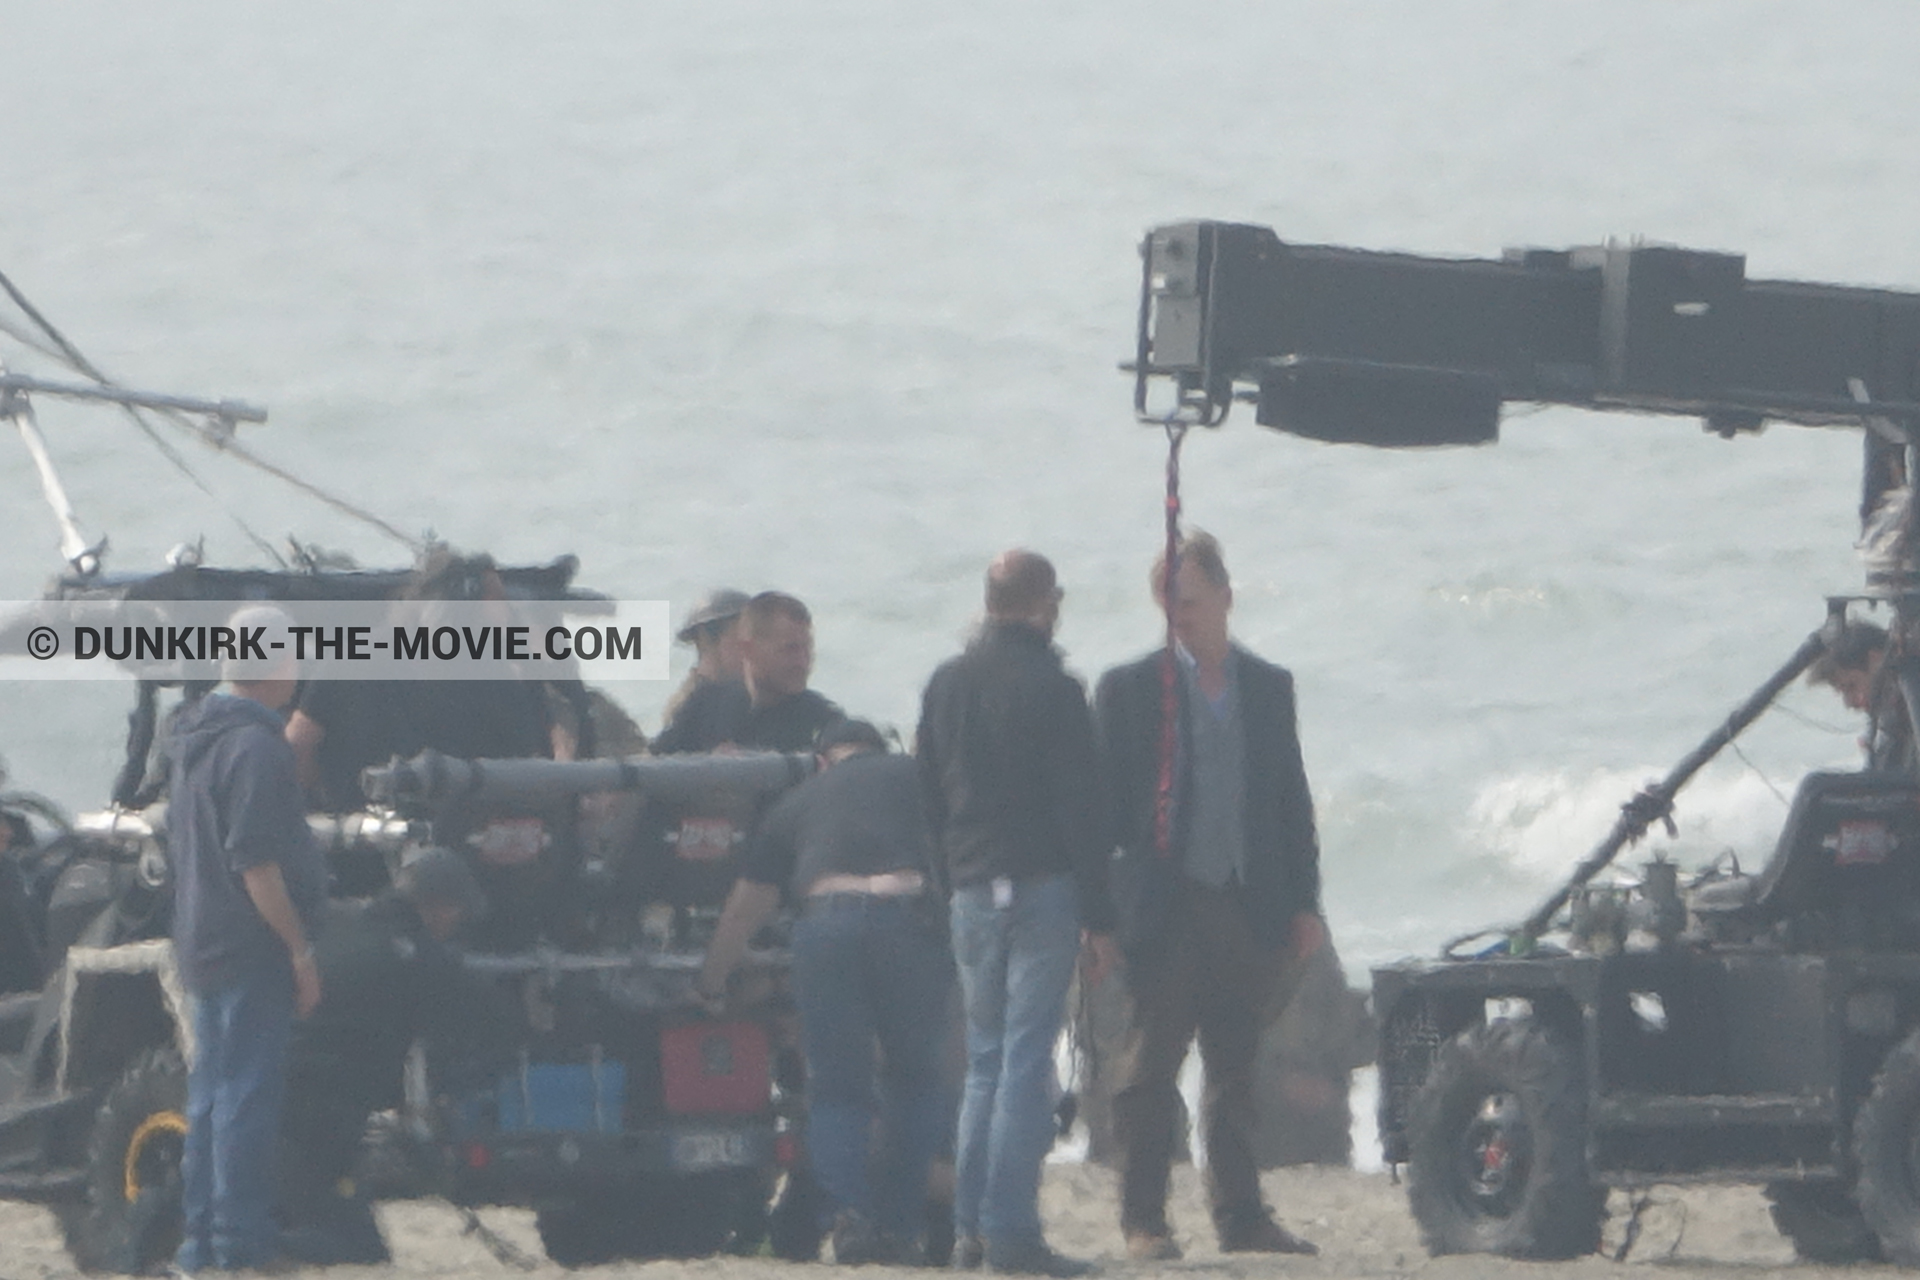 Picture with supernumeraries, Christopher Nolan, beach, technical team,  from behind the scene of the Dunkirk movie by Nolan